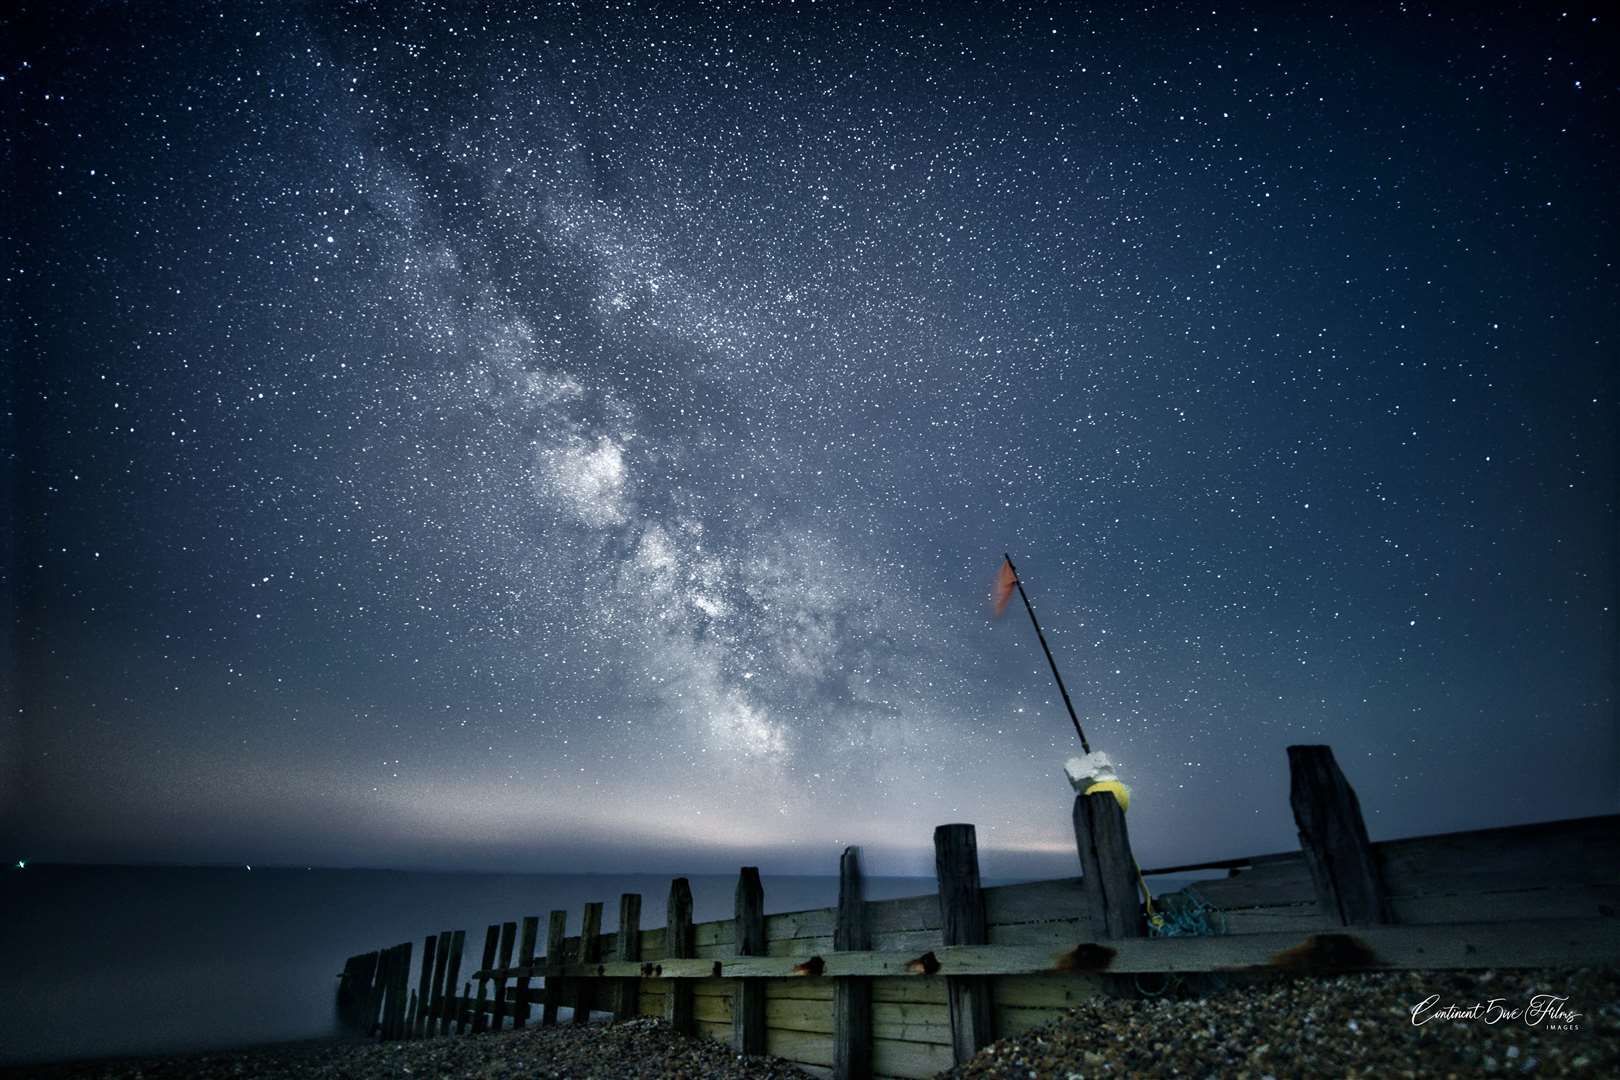 Mike Hardy from Romney Marsh has been travelling the county over the summer capturing stunning shots of the Milky Way. Picture: Mike Hardy